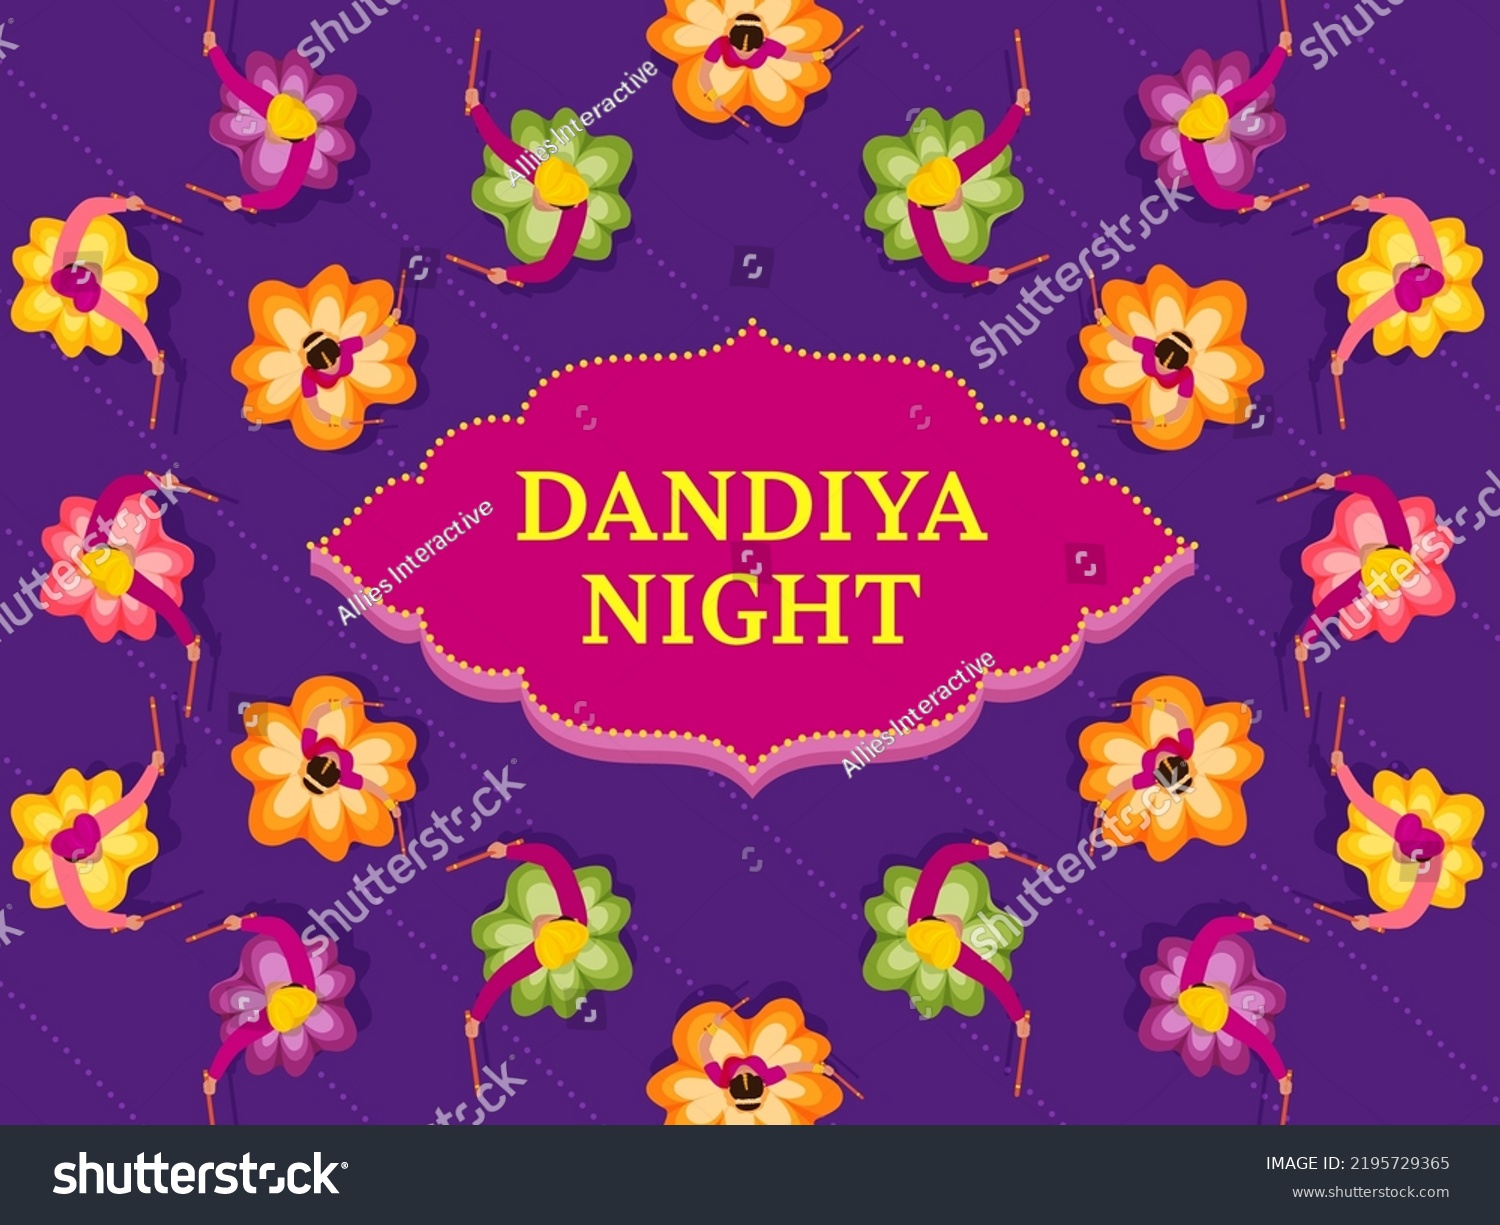 SVG of Navratri Night Celebration Background With Top View Of Indian People Playing Dandiya. svg